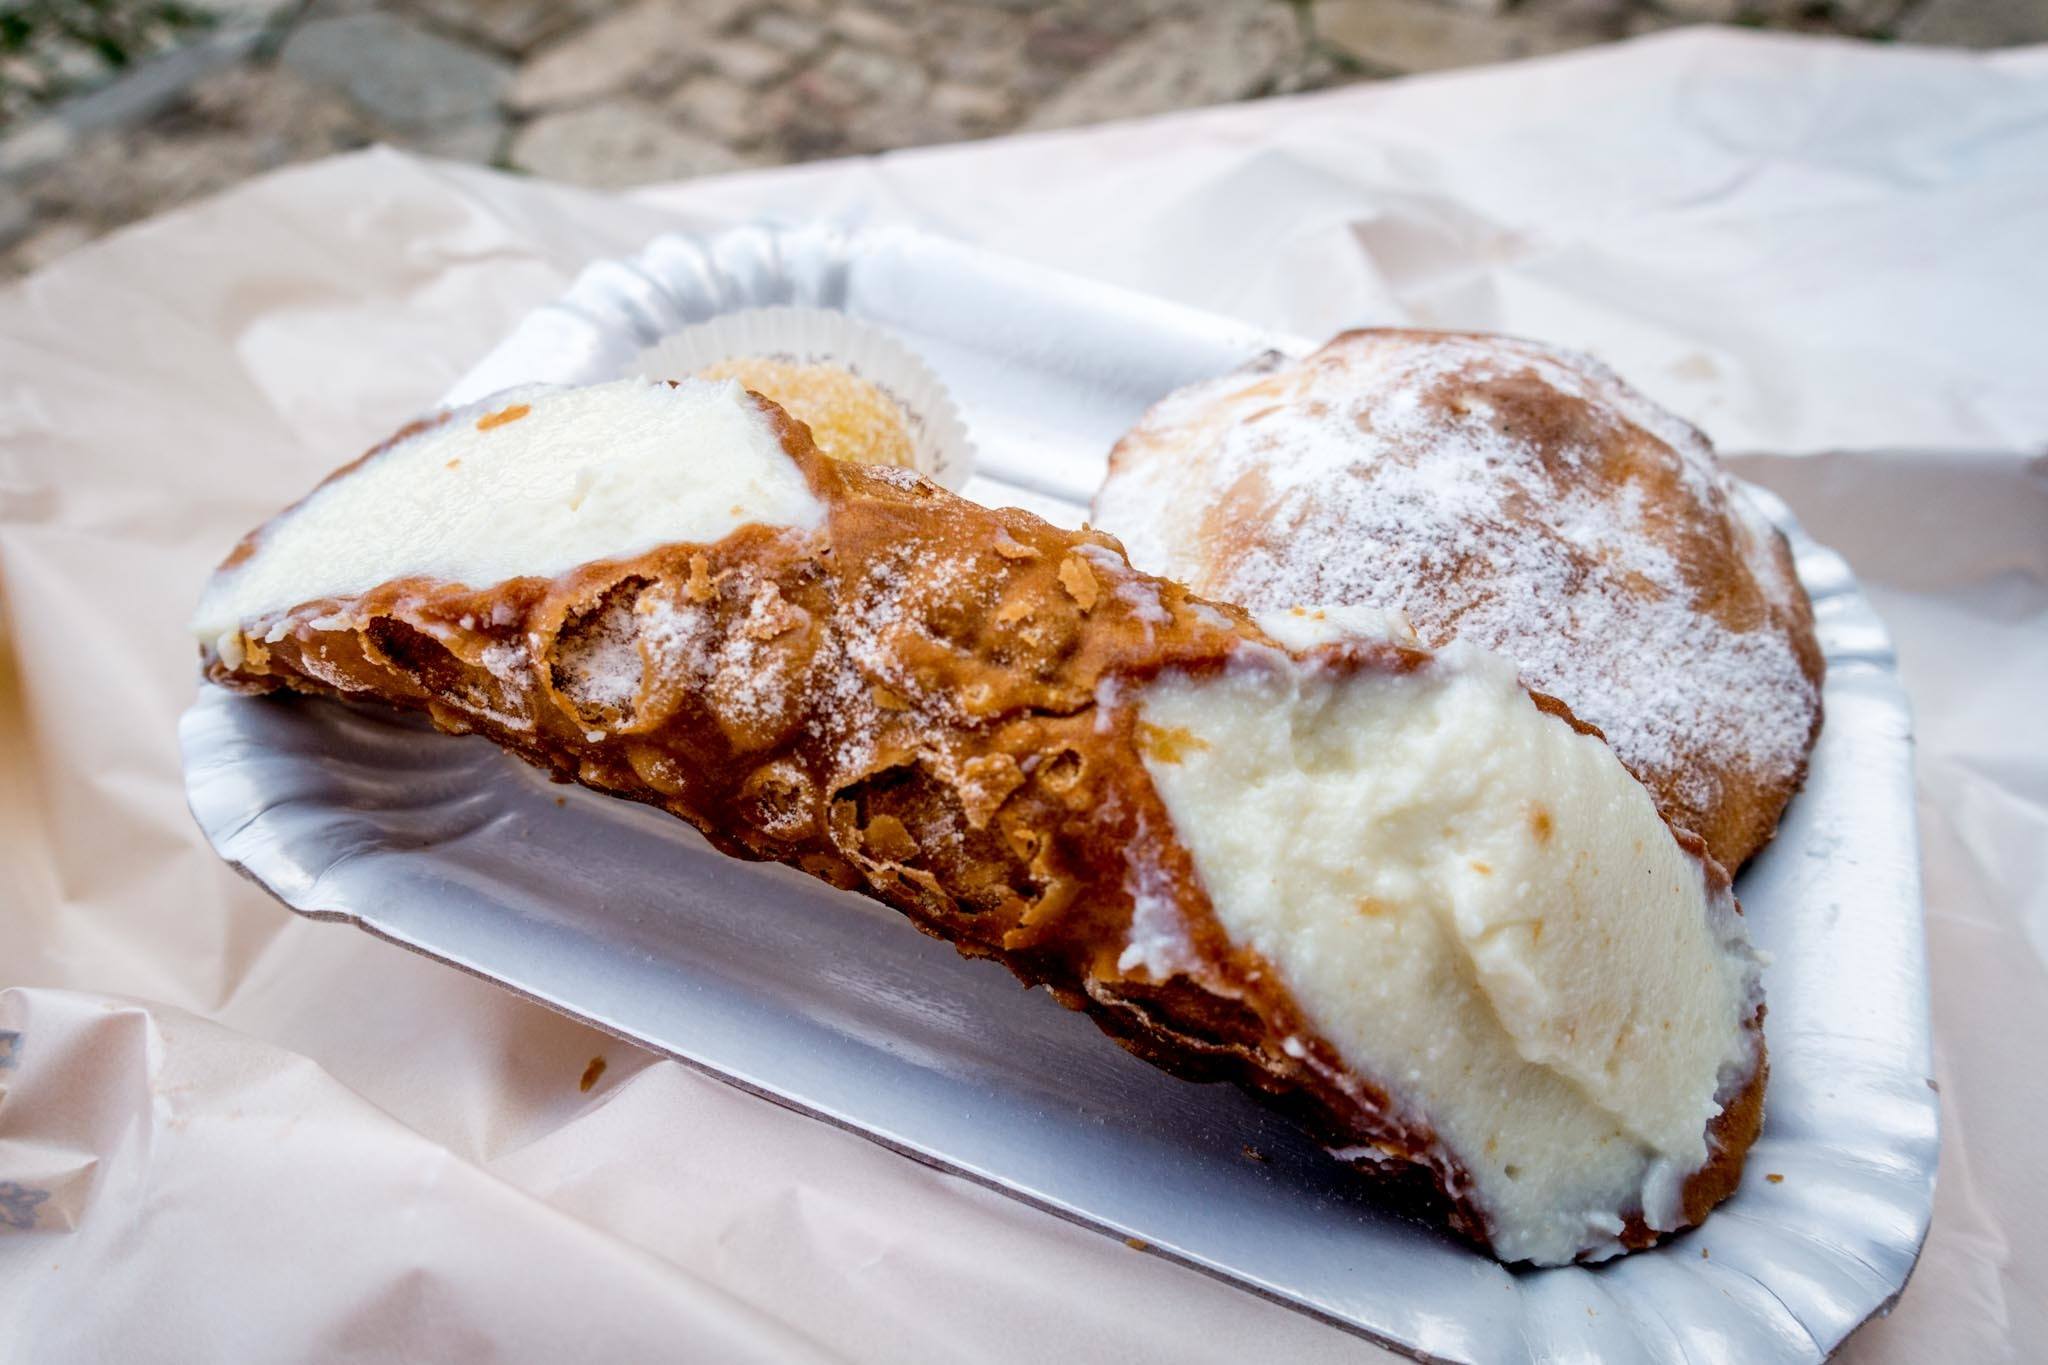 Trying cannoli from Maria Grammatico's is one of the top things to do in Sicily